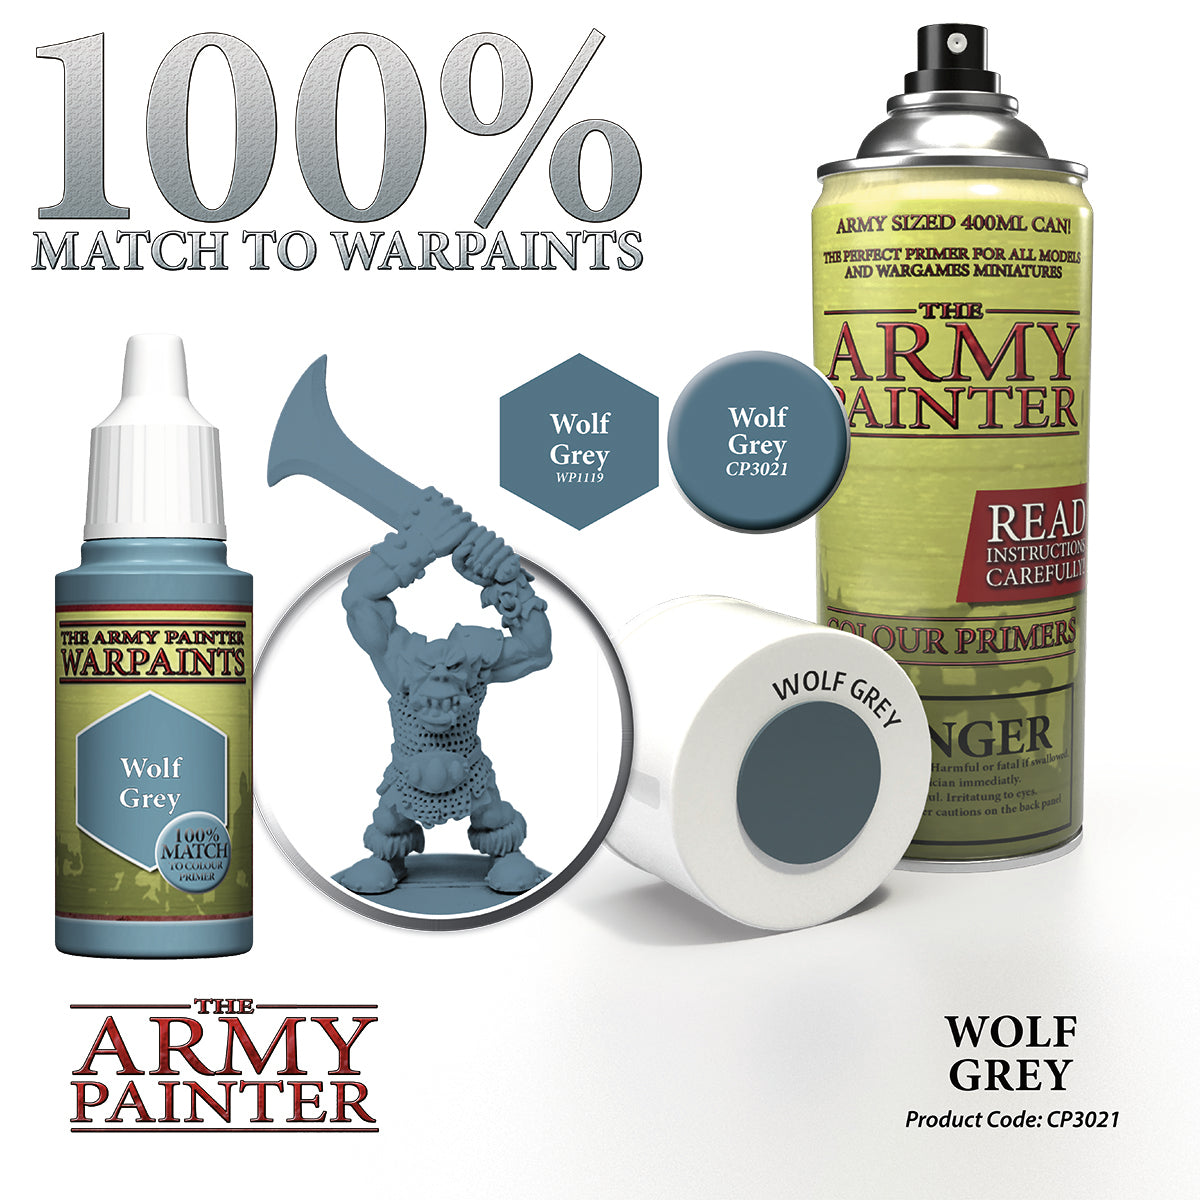 Army Painter: Wolf Grey Spray Paint Primer